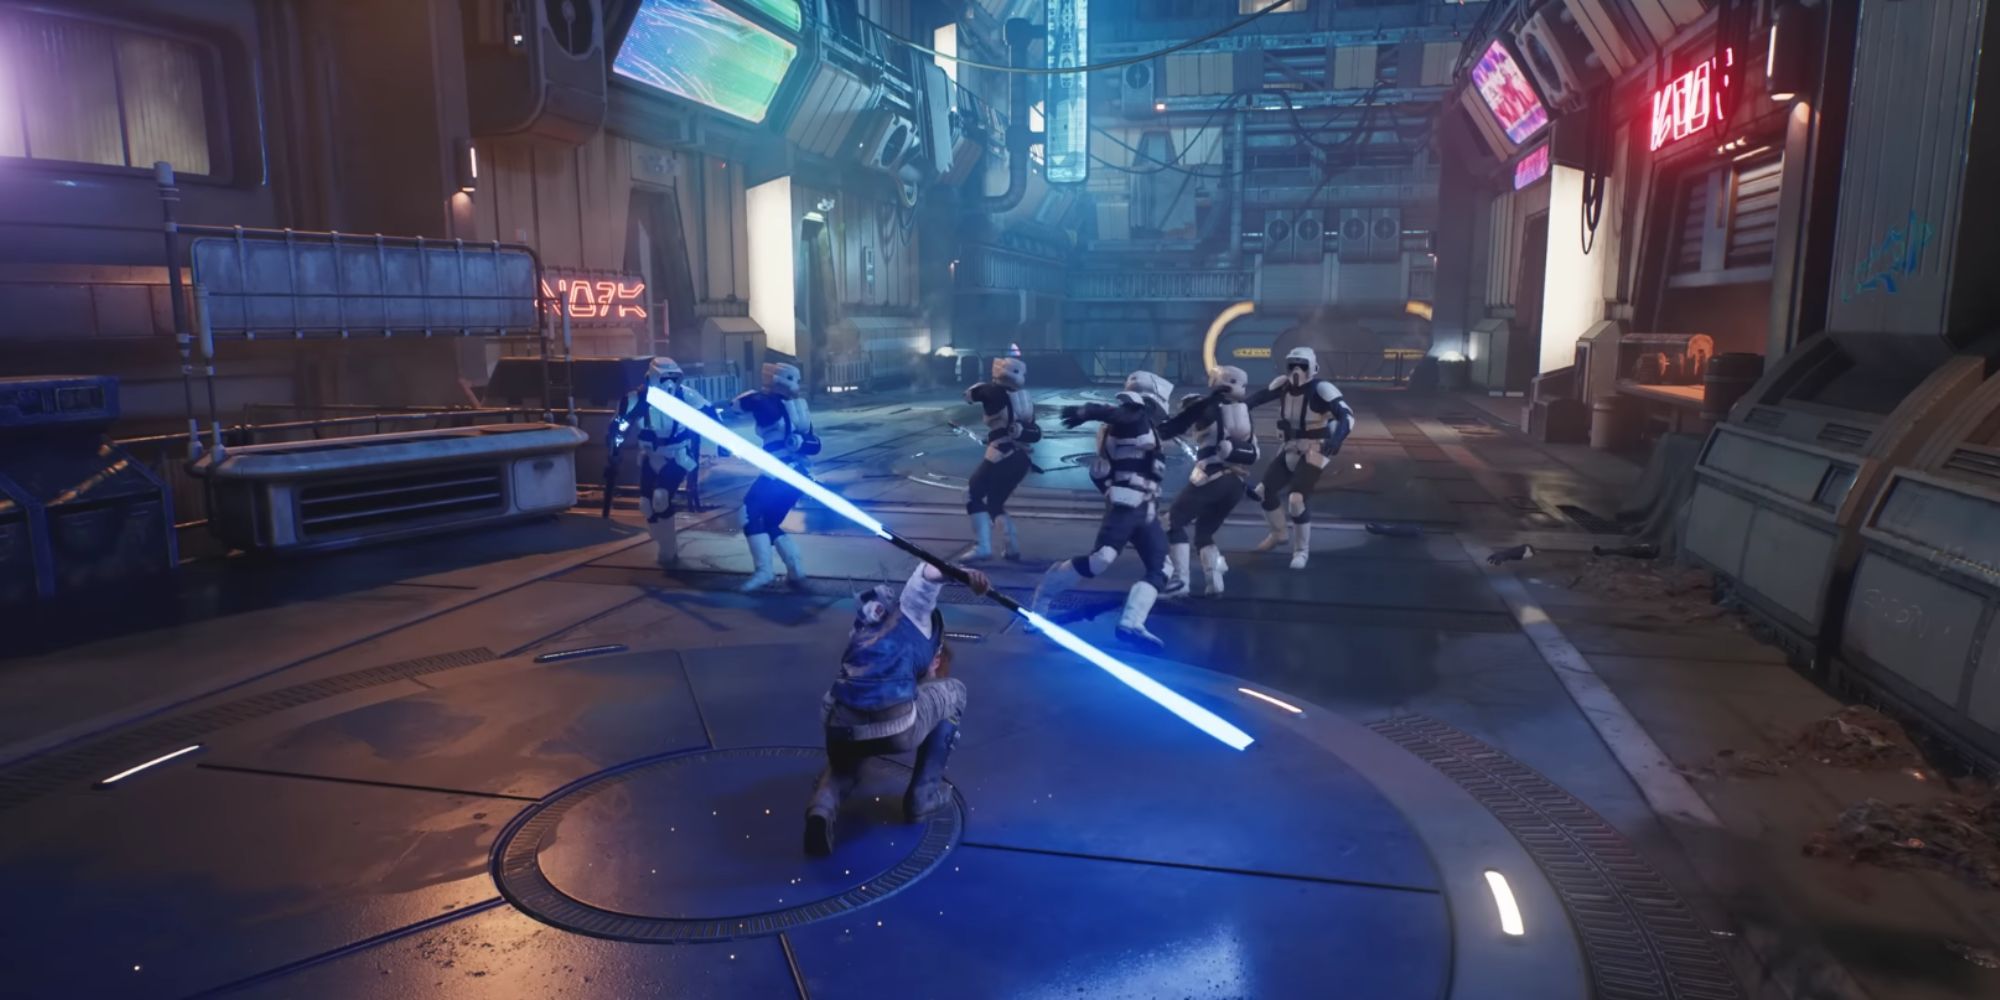 Cal fighting stormtroopers on Coruscant.